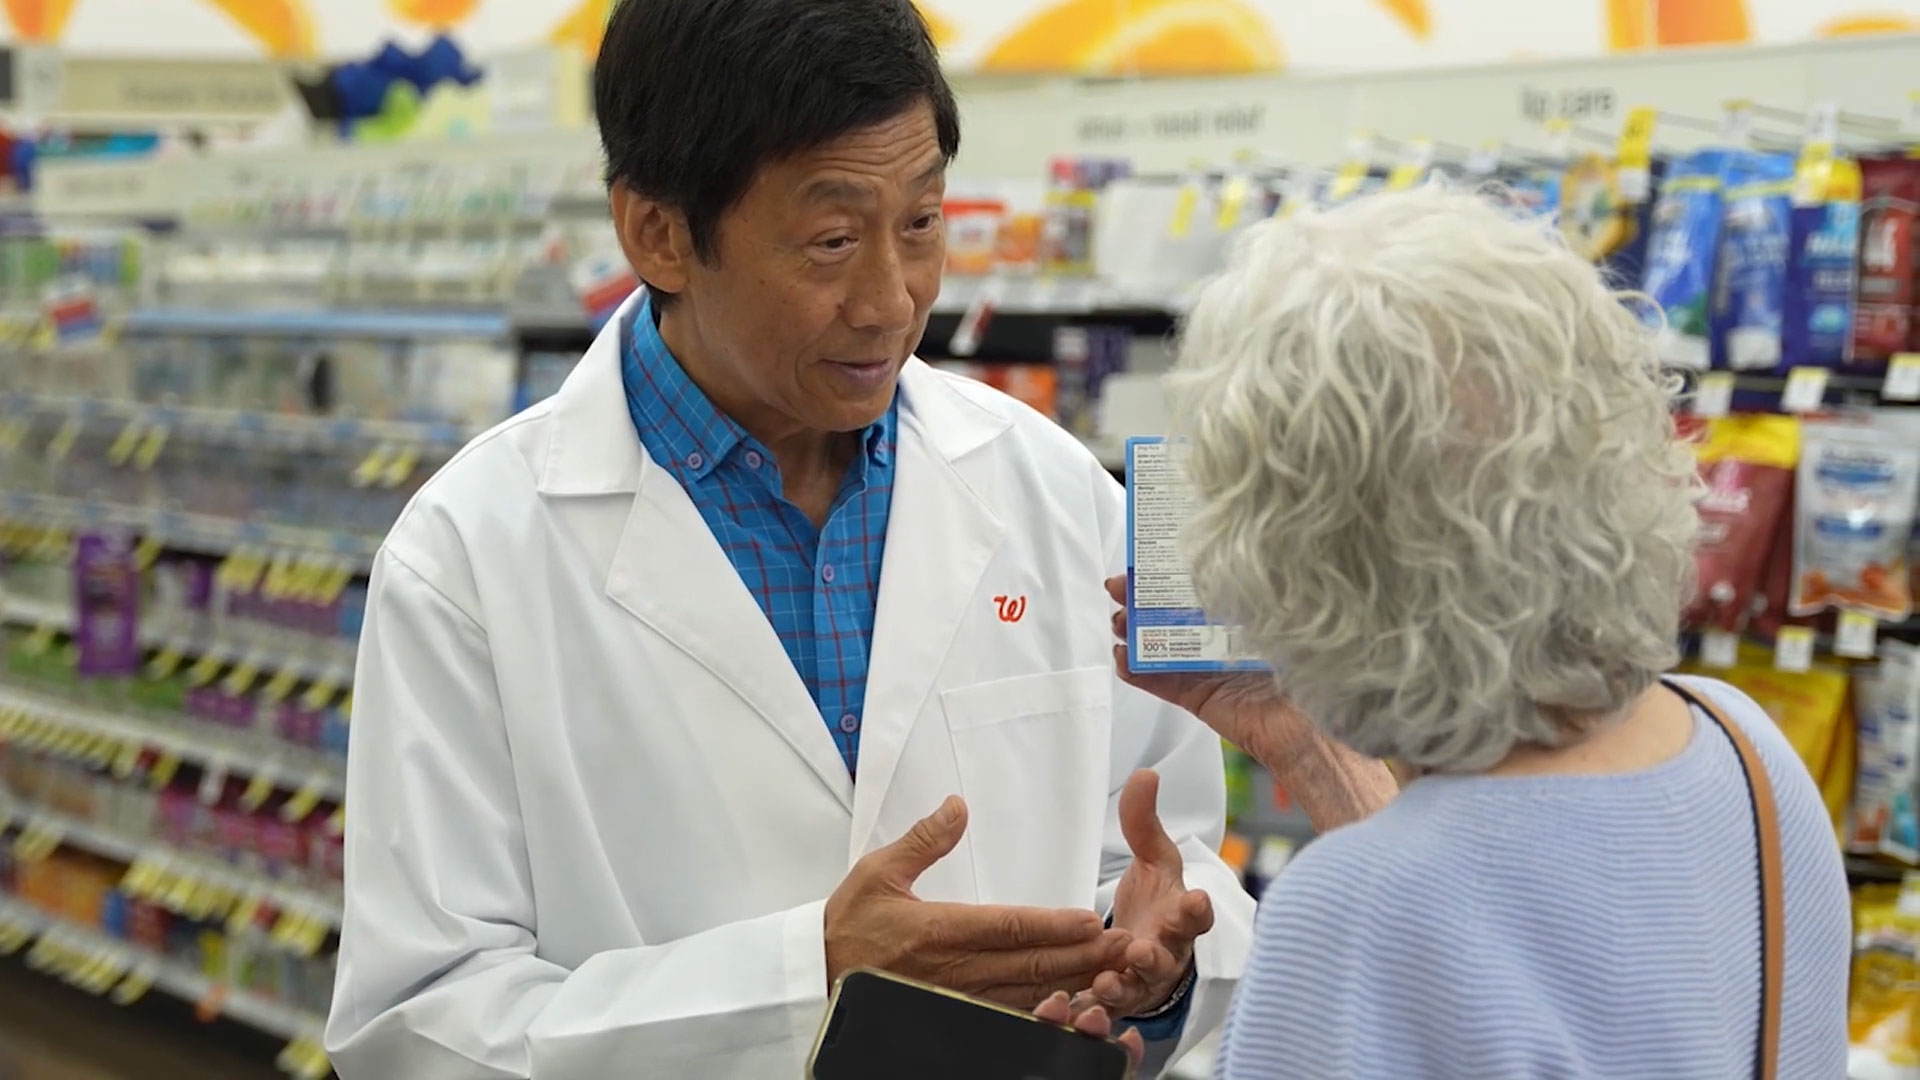 Walgreens and Boehringer Ingelheim Are Partnering to Improve Diversity in Clinical Trials